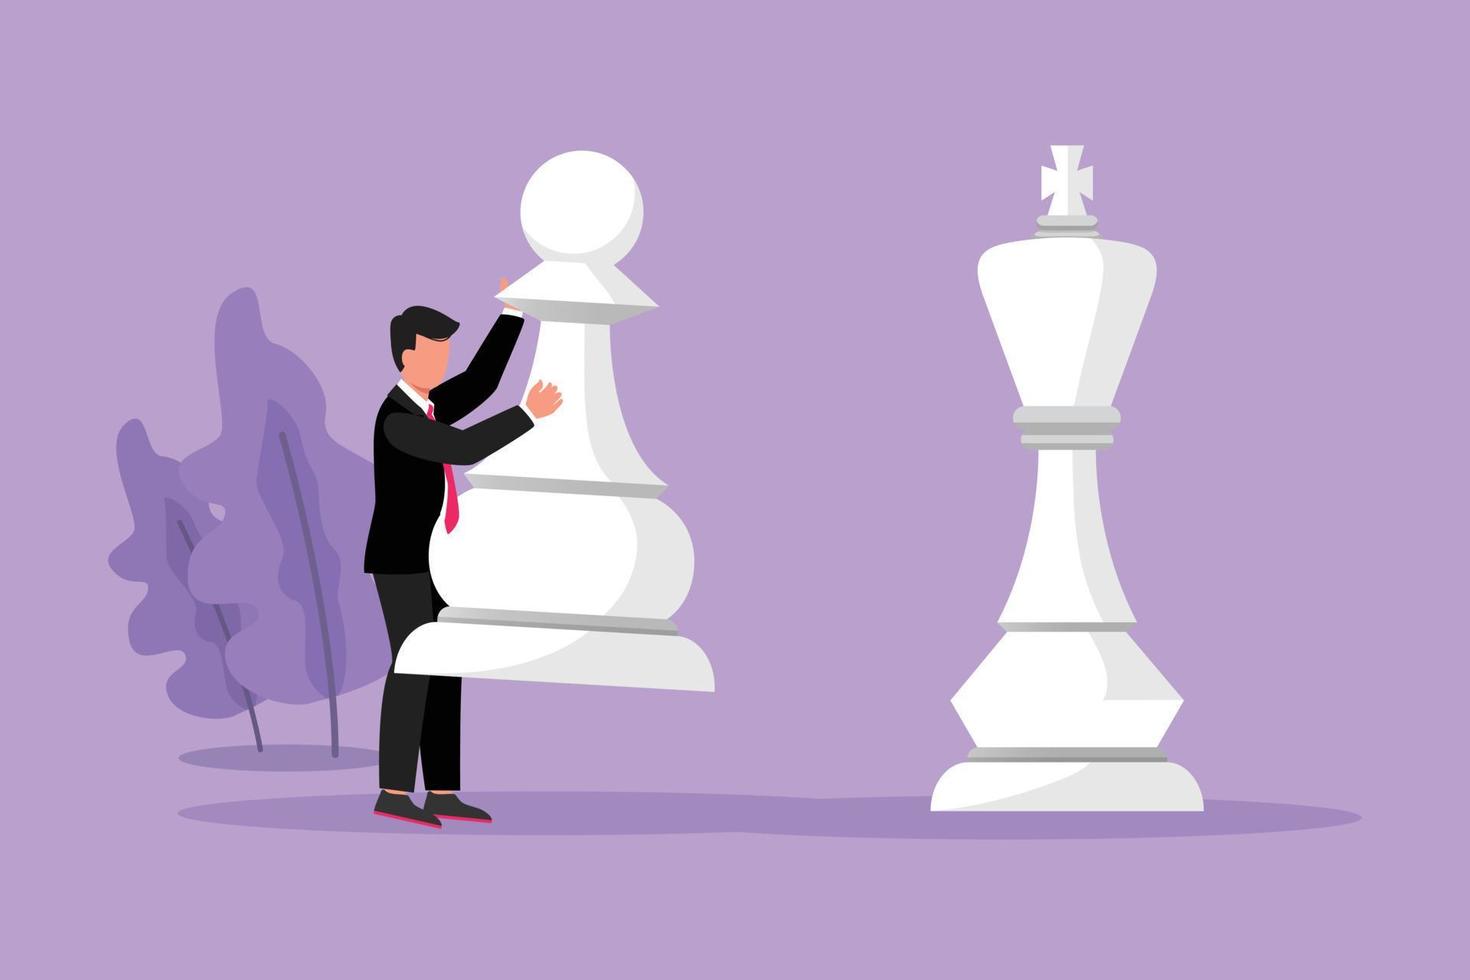 Graphic flat design drawing businessman holding pawn chess piece to beat king chess. Strategic planning, business development strategy, tactics in entrepreneurship. Cartoon style vector illustration